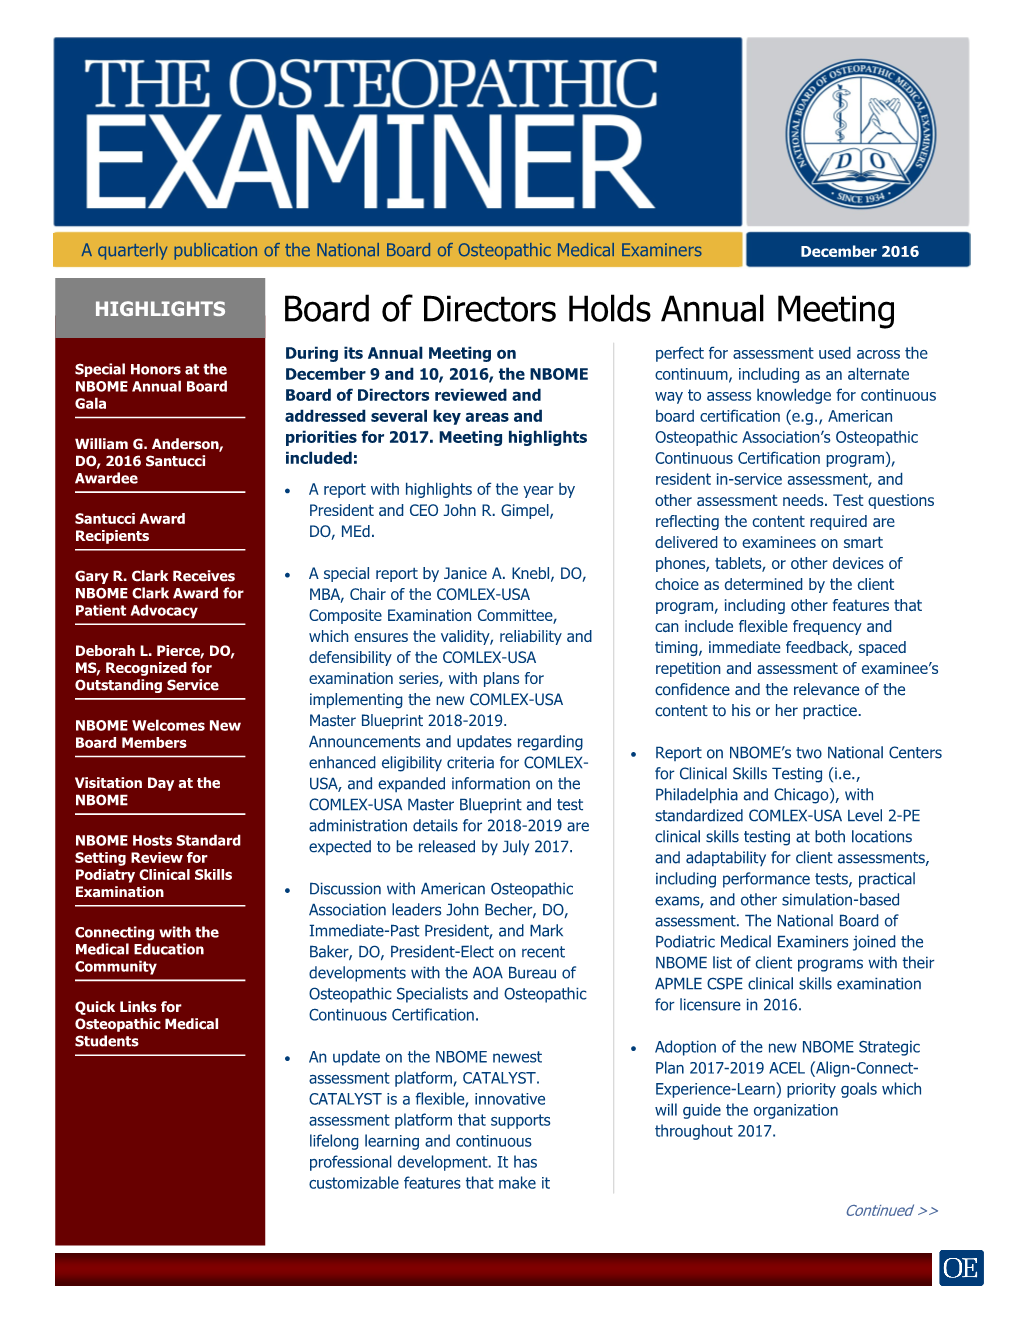 The Osteopathic Examiner to the Editor: the NBOME’S Mission Mark E